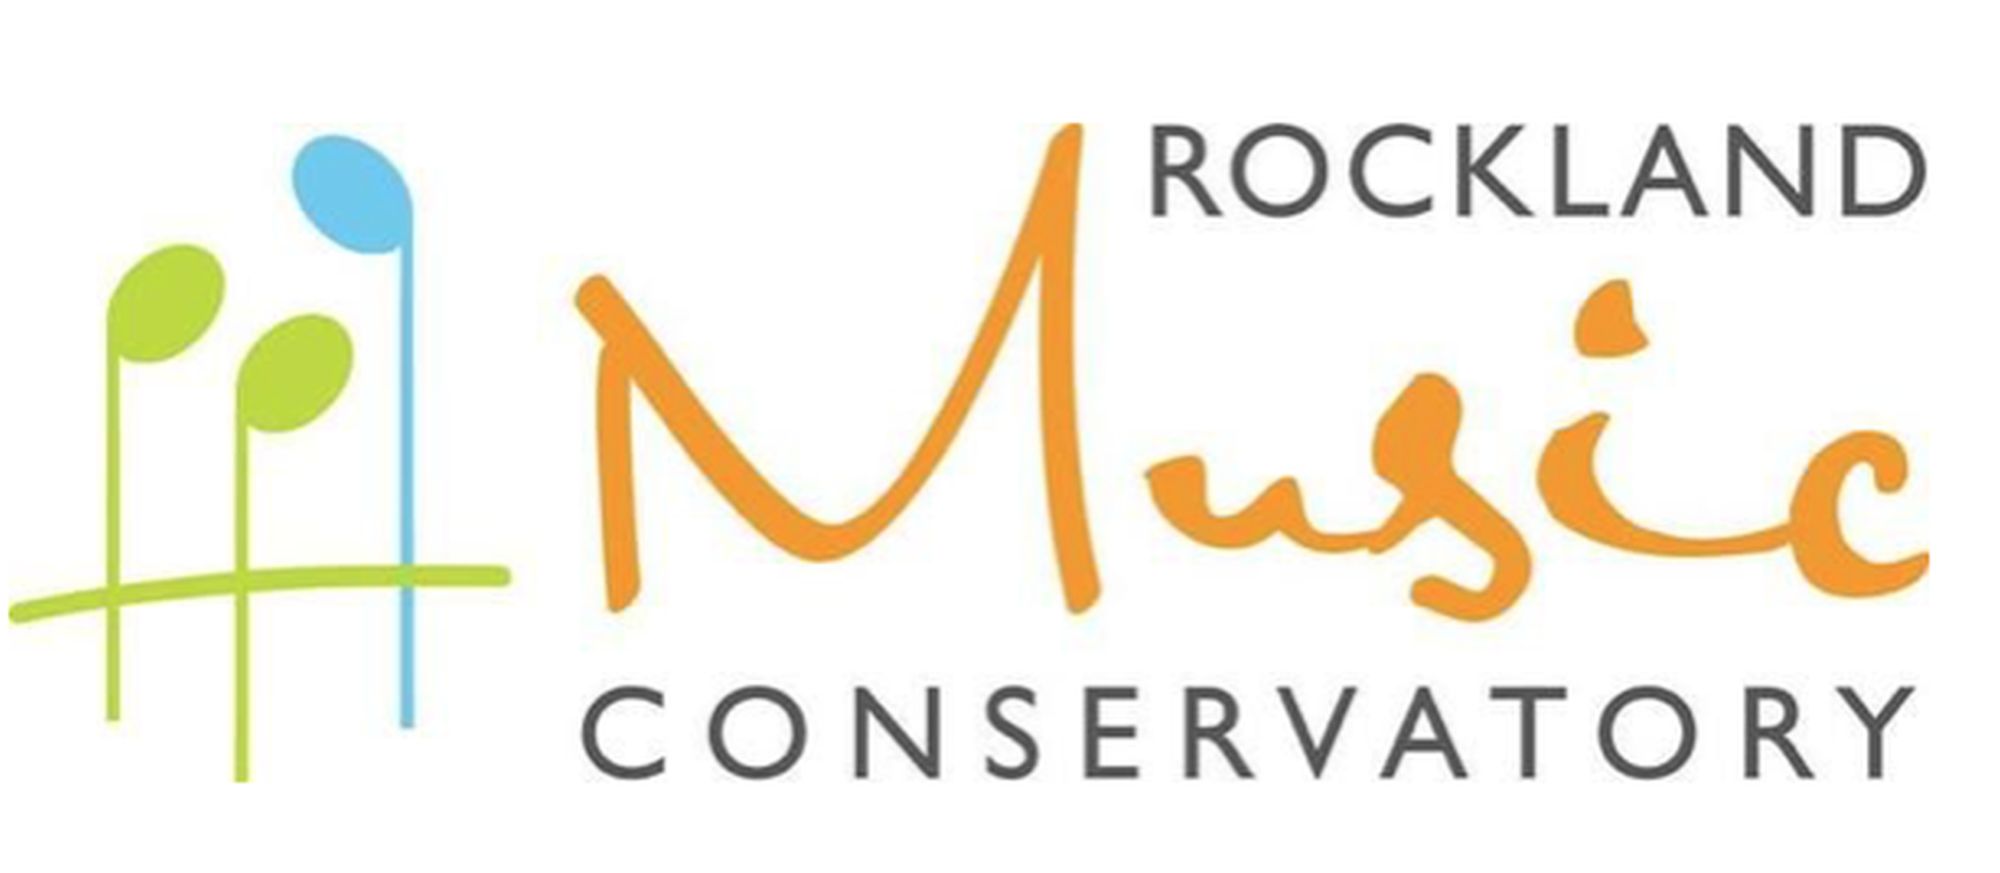 Rockland Conservatory of Music